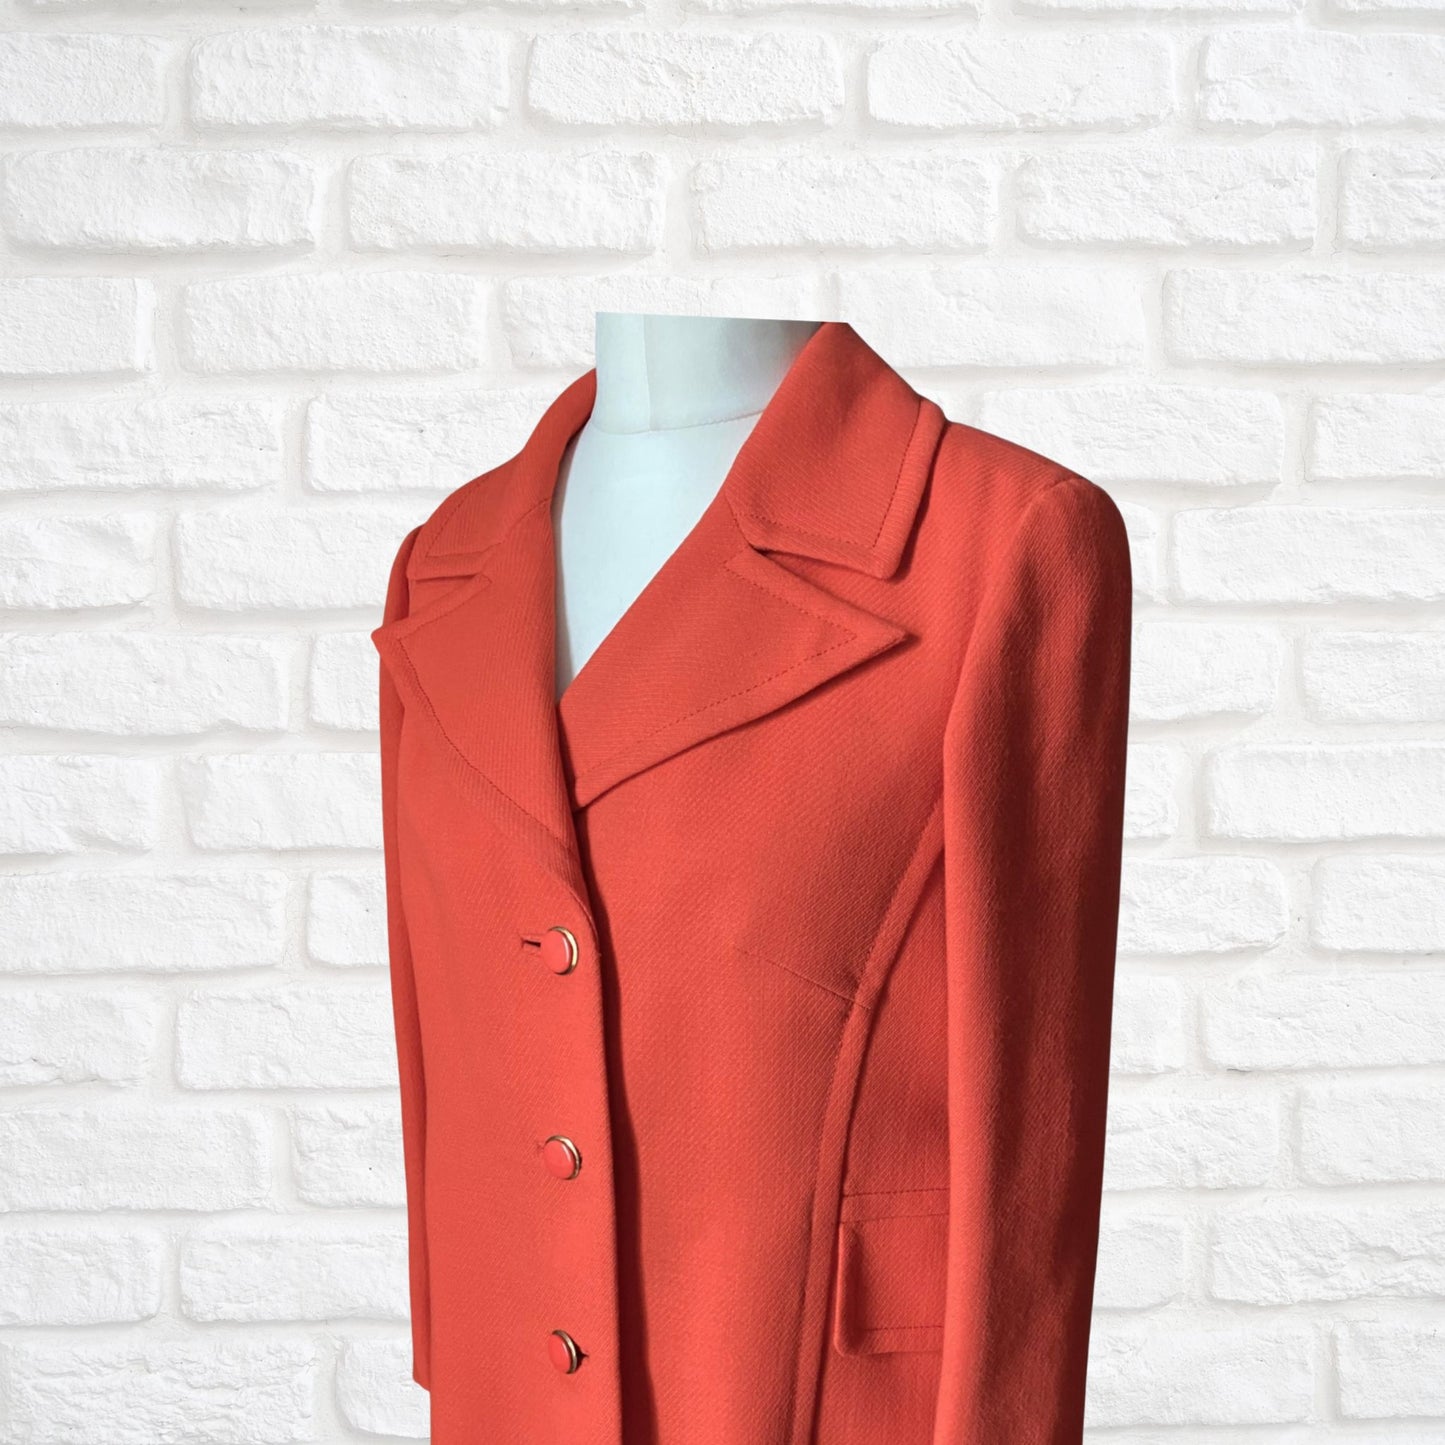 70s orange coat. Wool blend vintage jacket, fully lined.   Dagger collar and faux pocket  detail. Button down front  .  Approx UK size 14-16